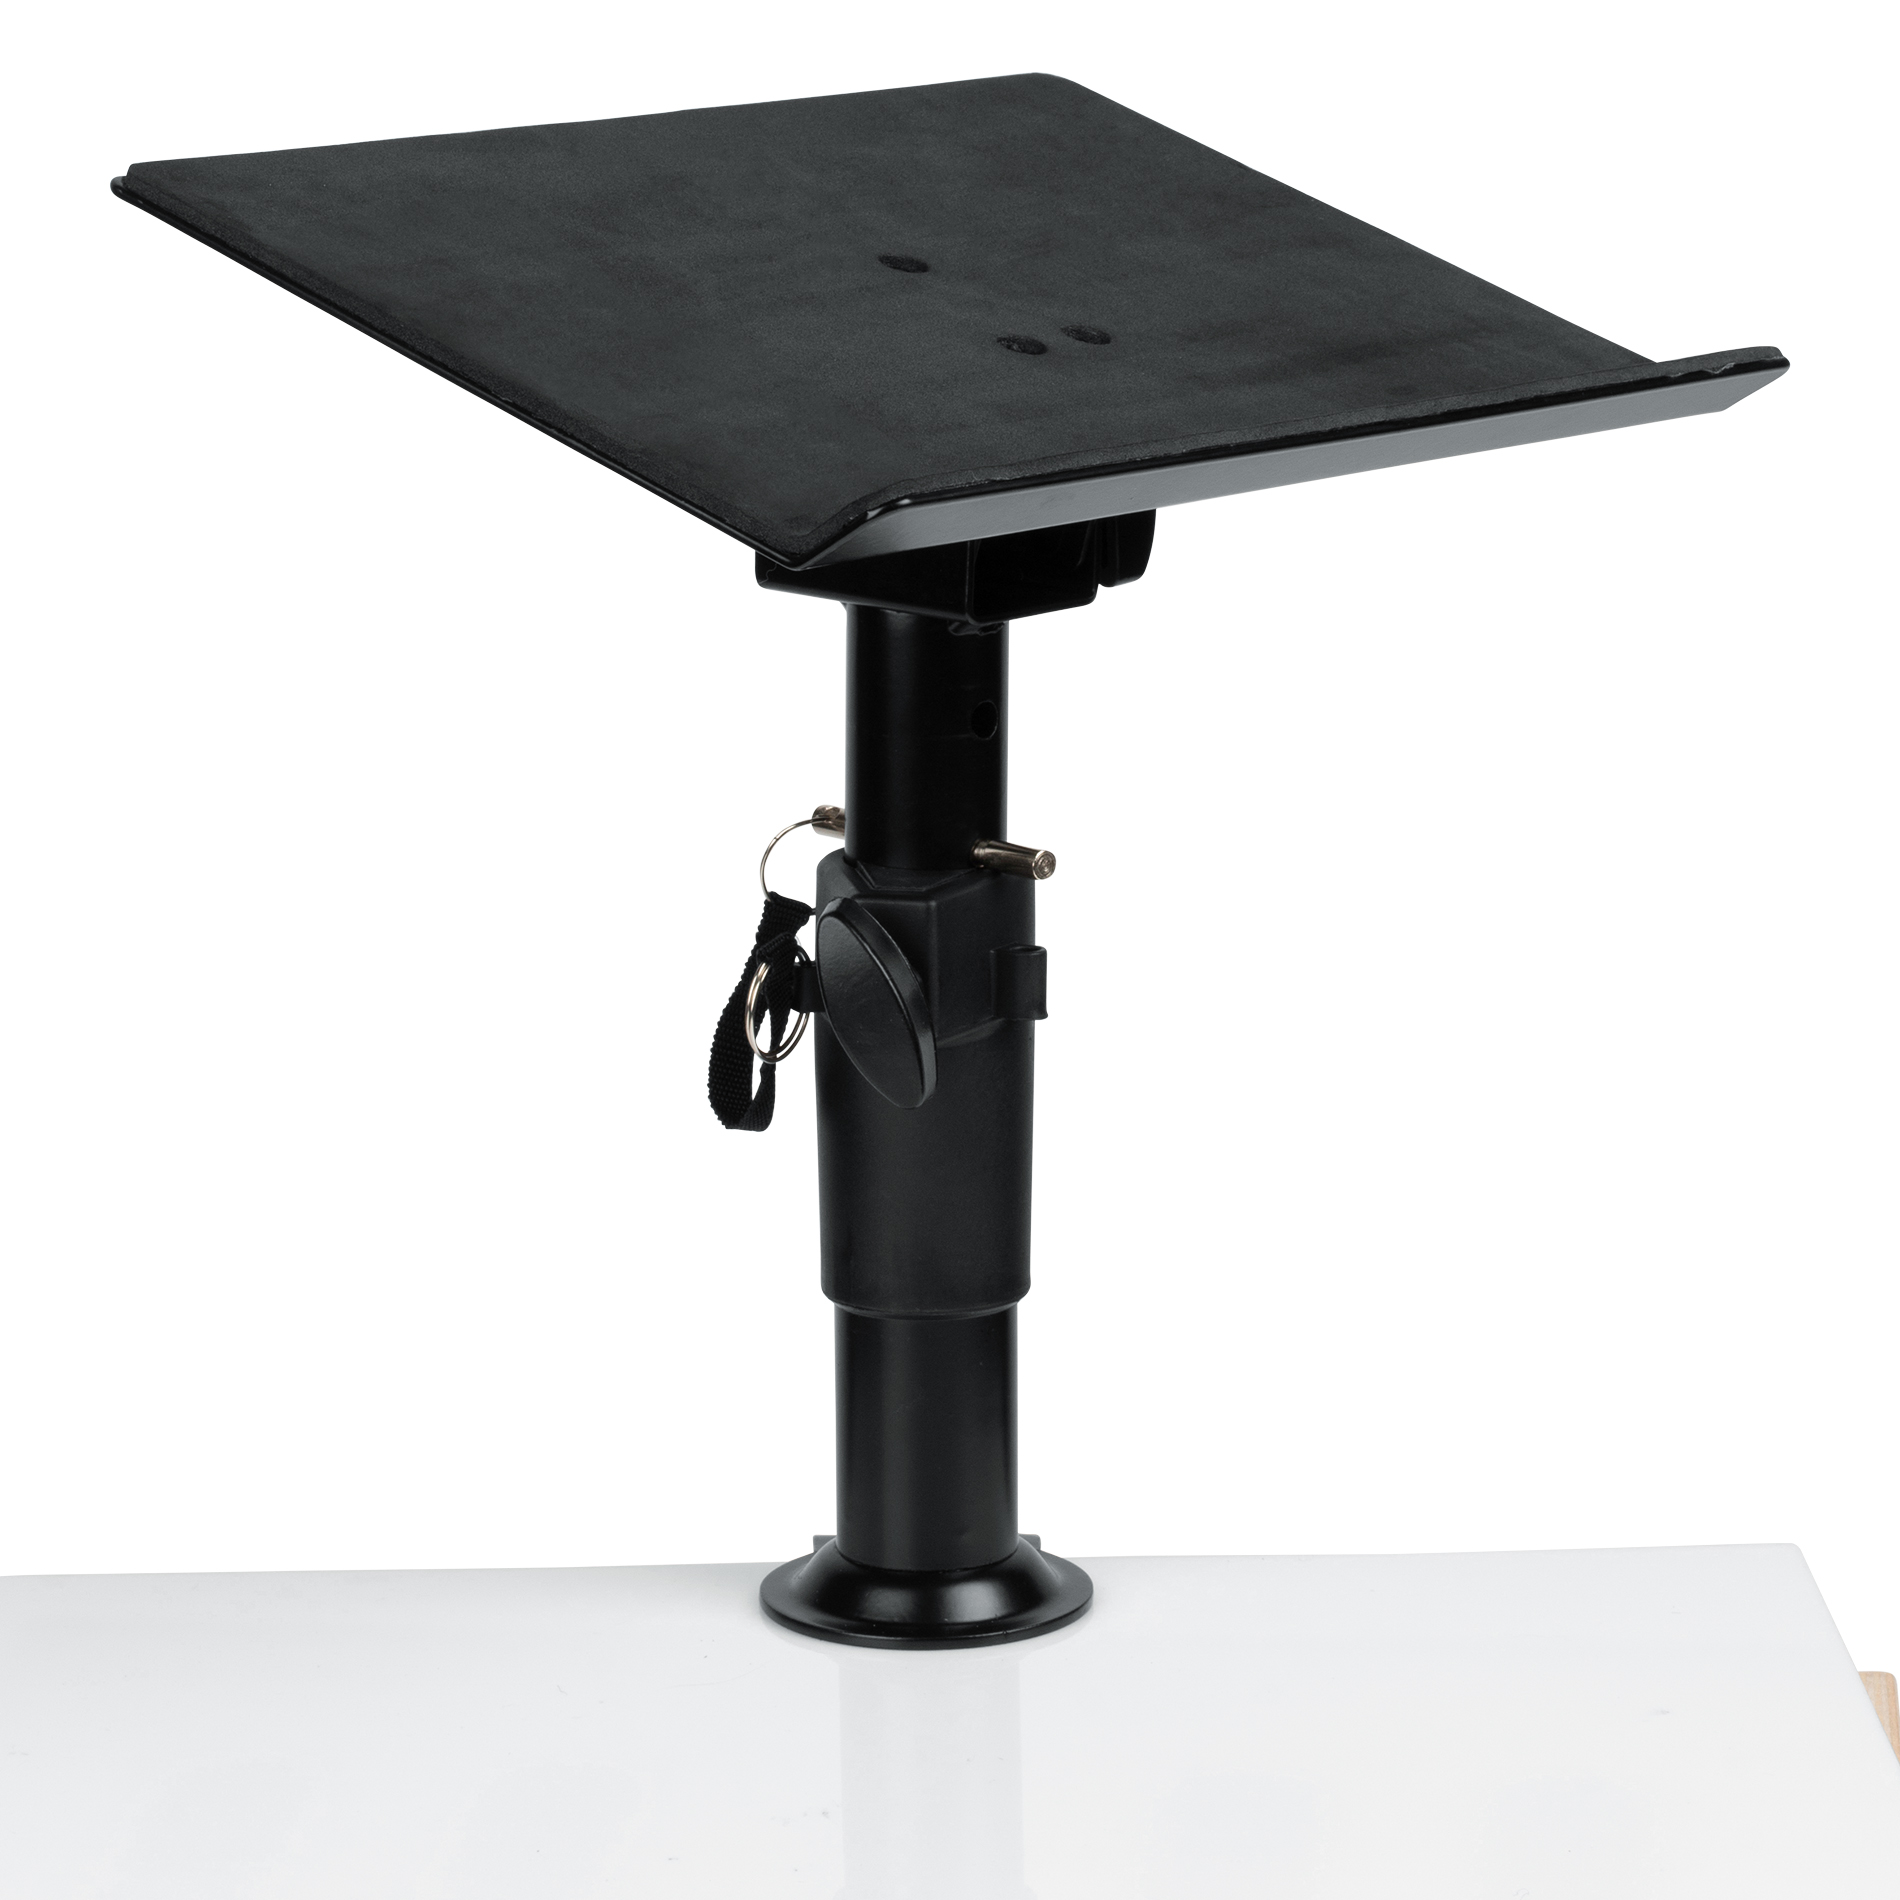 Clampable Laptop And Accessory Stand-GFWLAPTOP2500